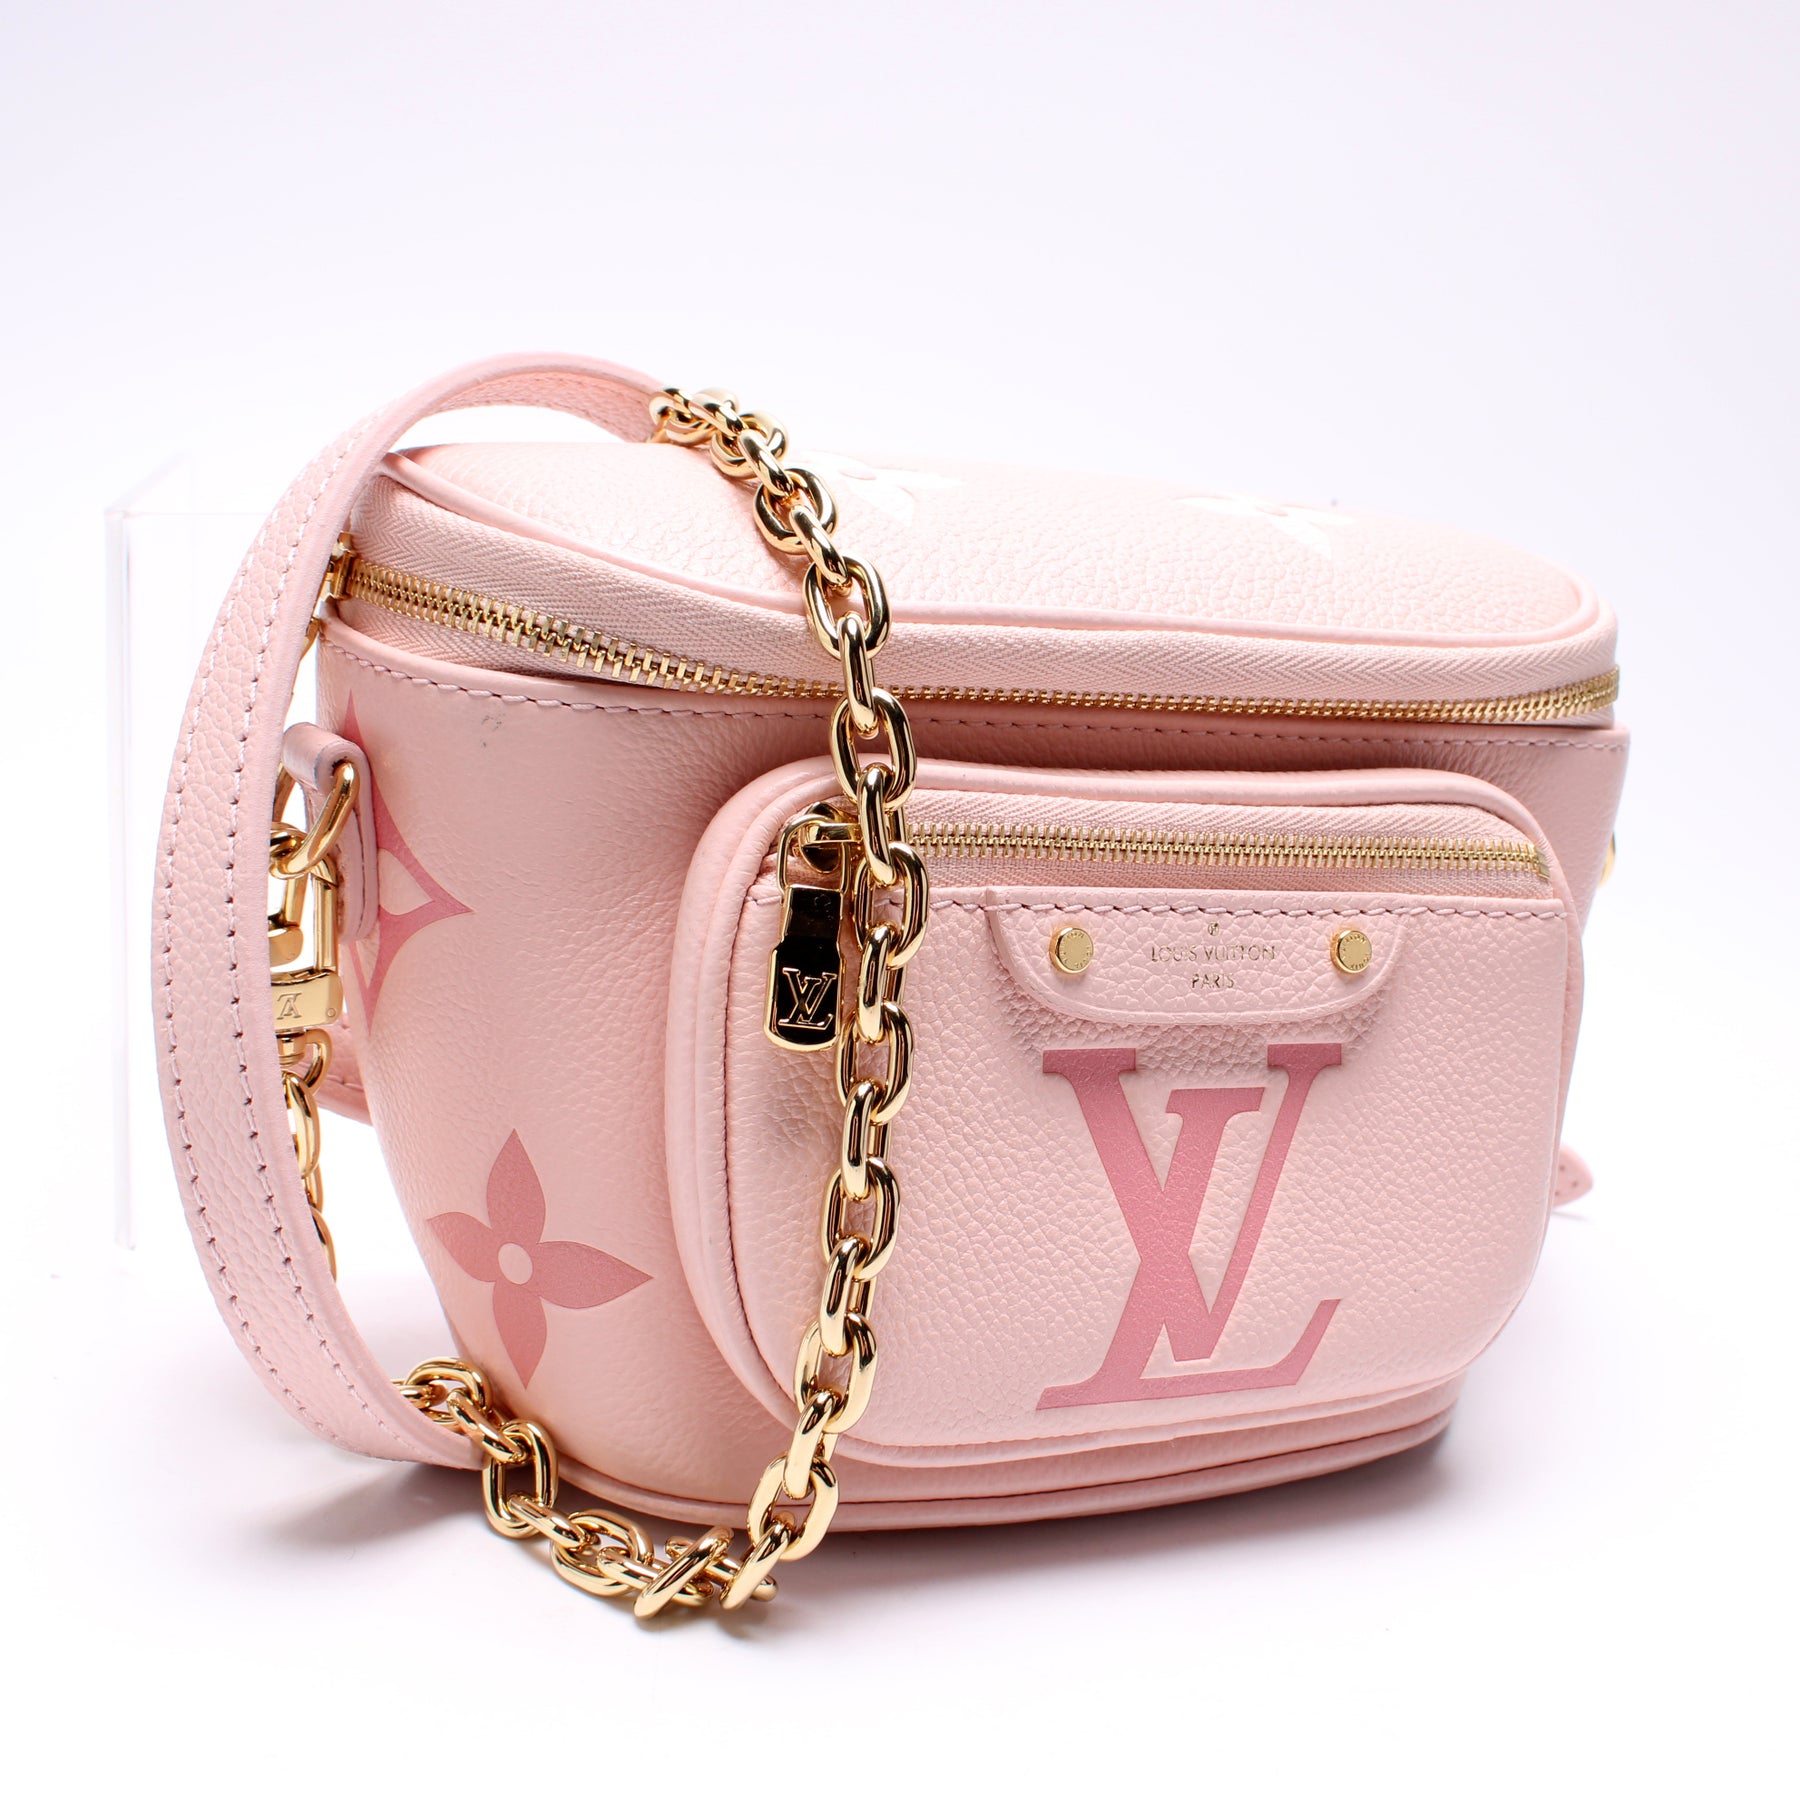 LOUIS VUITTON IS COMING OUT WITH THE MINI BUMBAG EMPREINTE LEATHER GIANT  MONOGRAM?!?! 